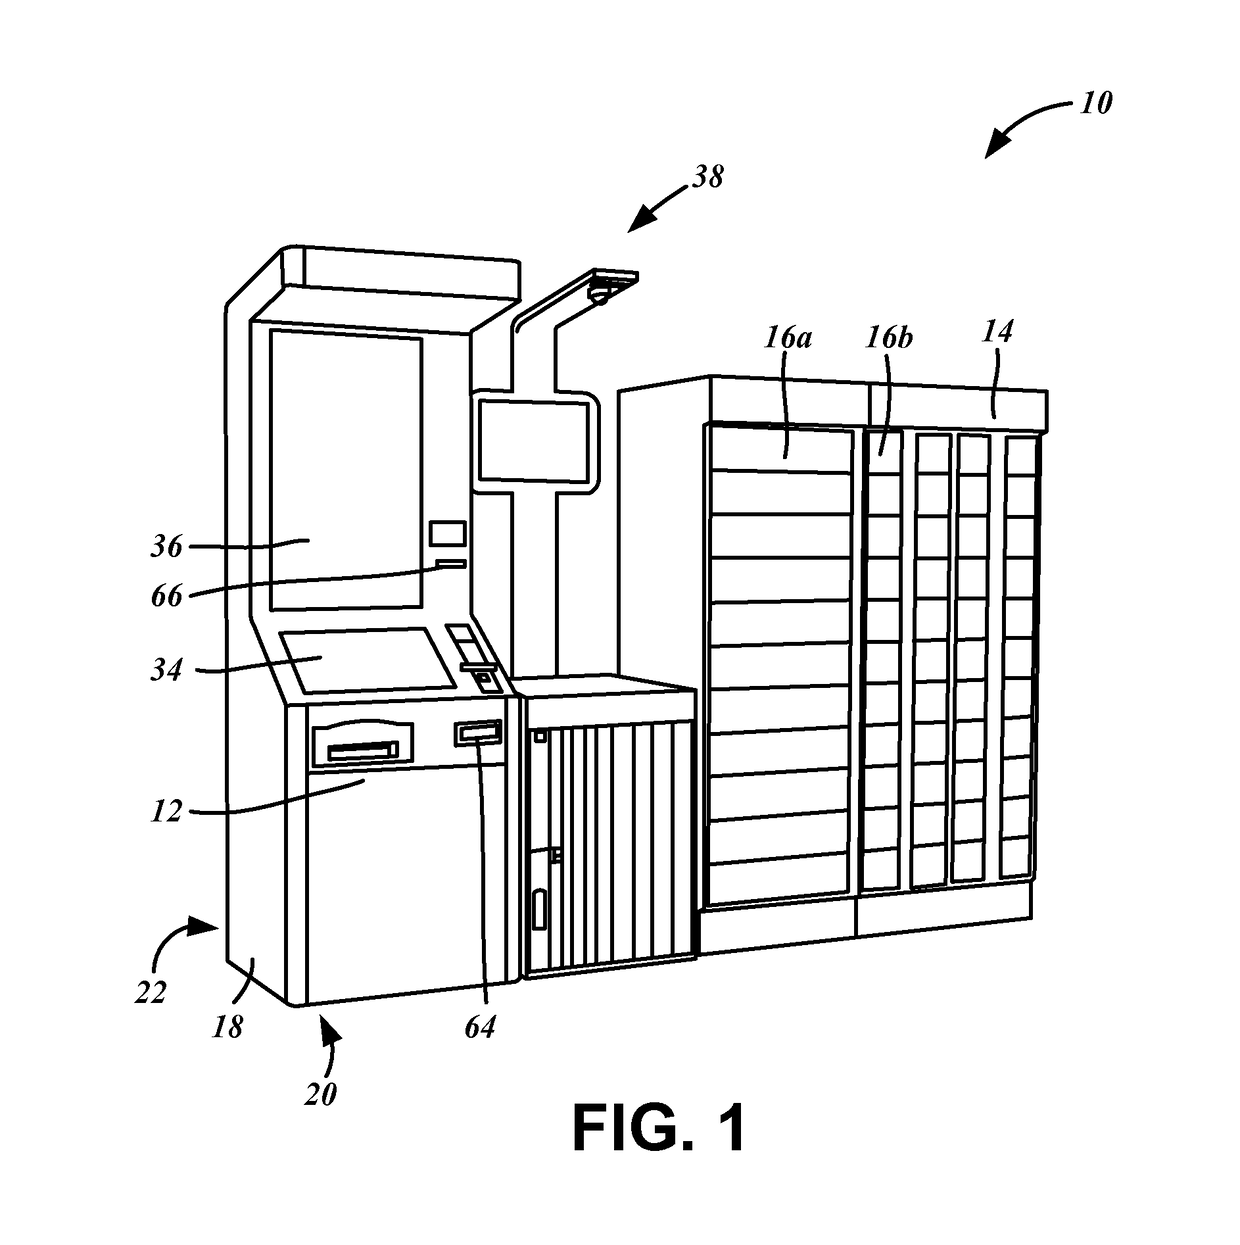 Multifunctional self-service shipping and mail processing system